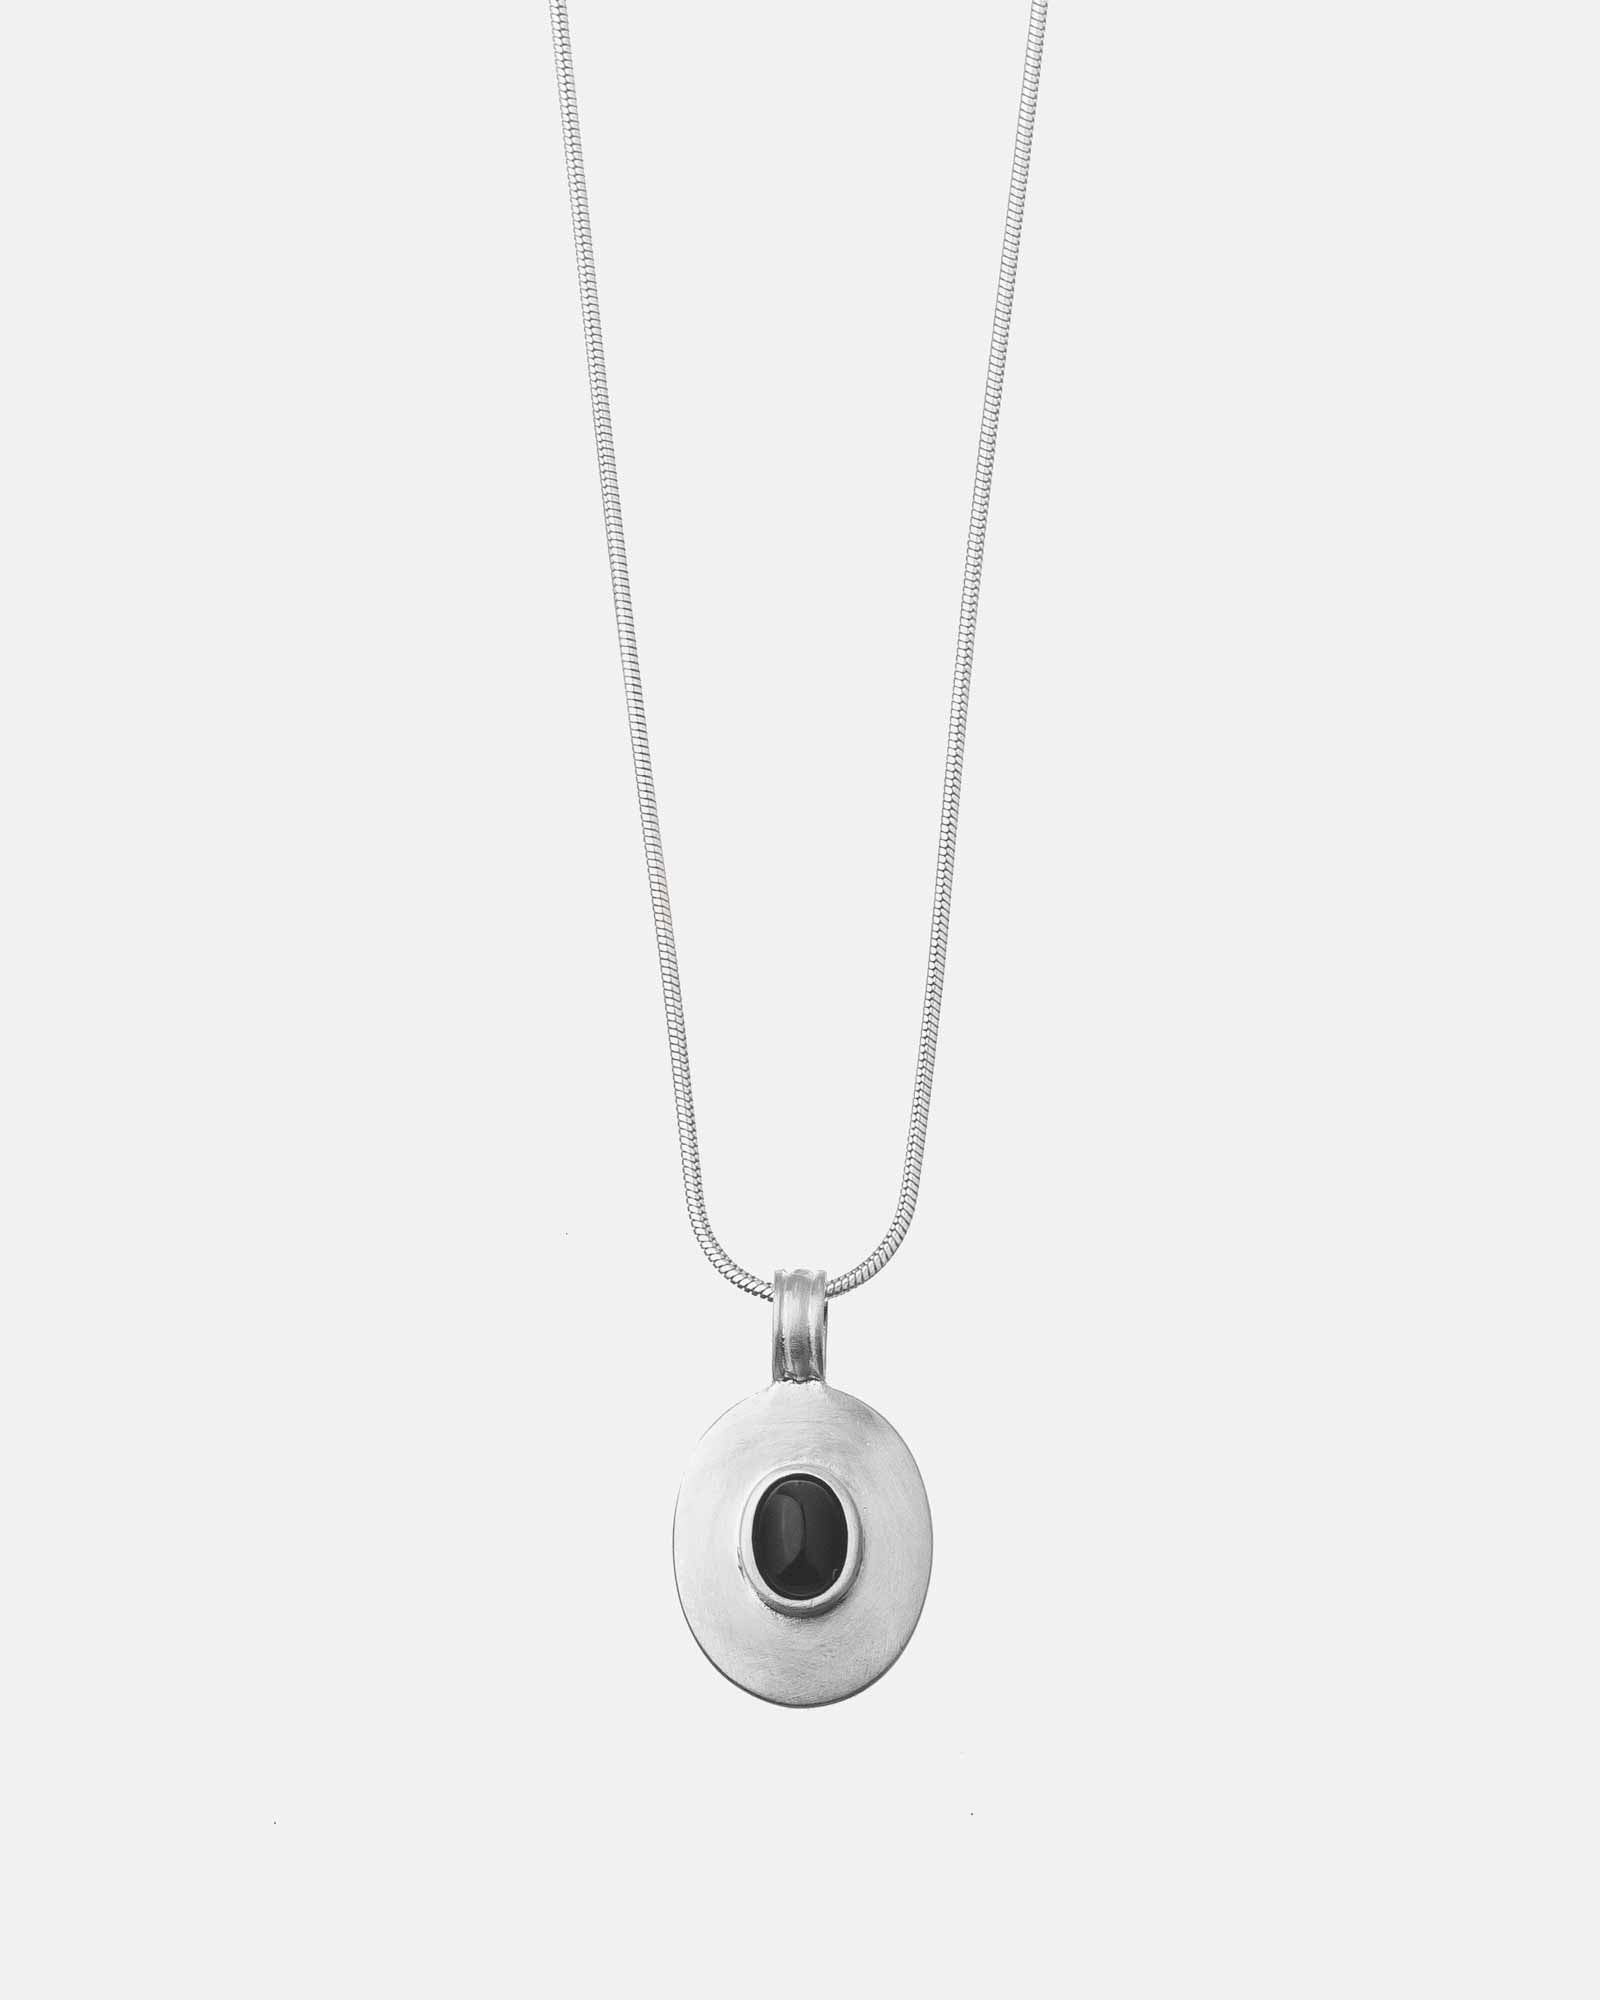 silver necklace with onix stone pendant